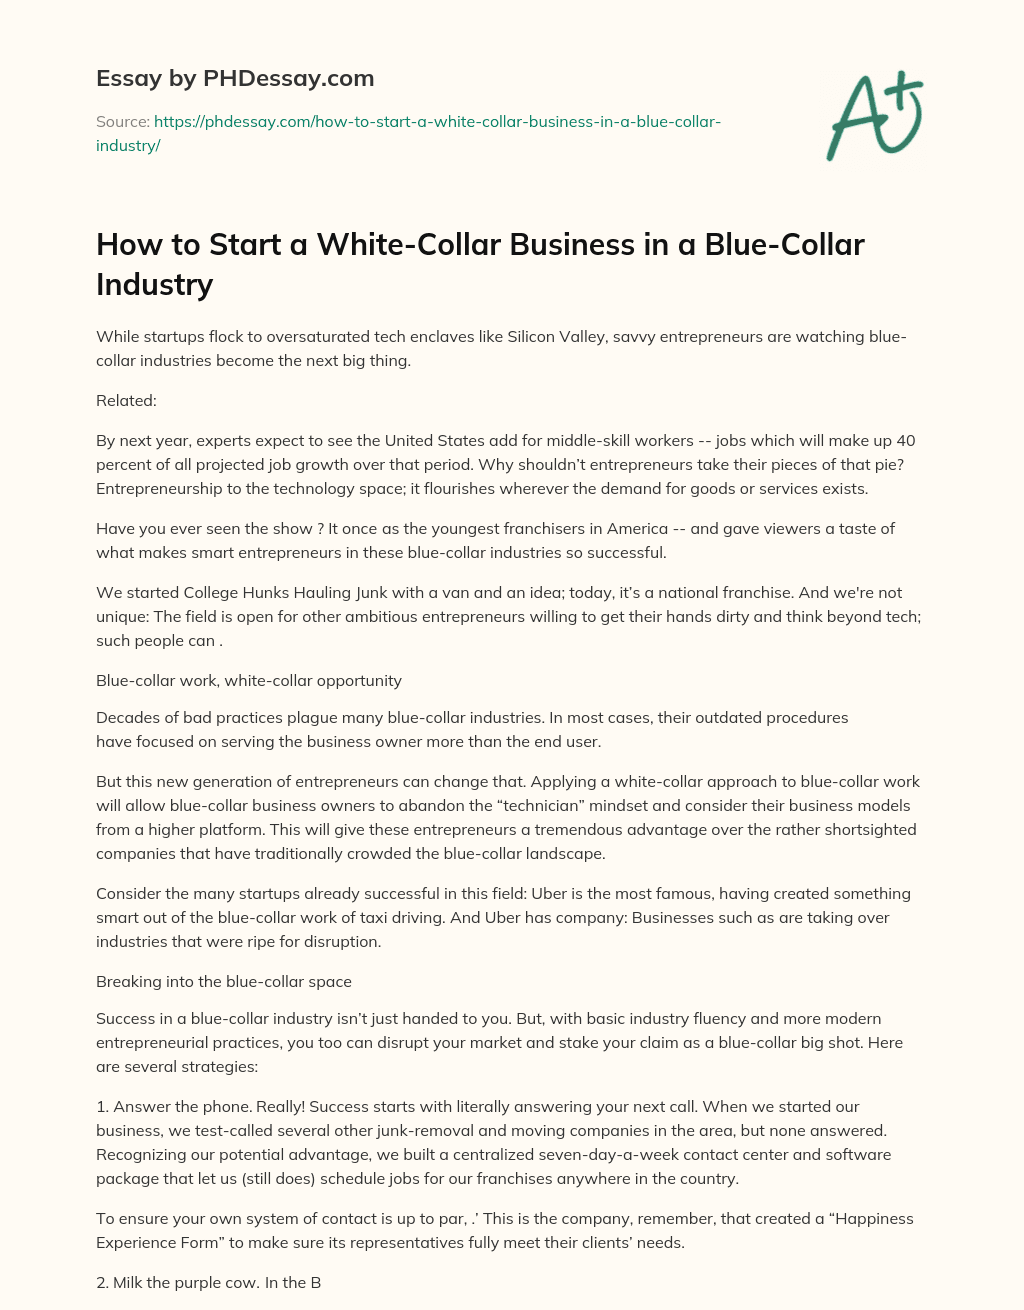 How to Start a White-Collar Business in a Blue-Collar Industry essay